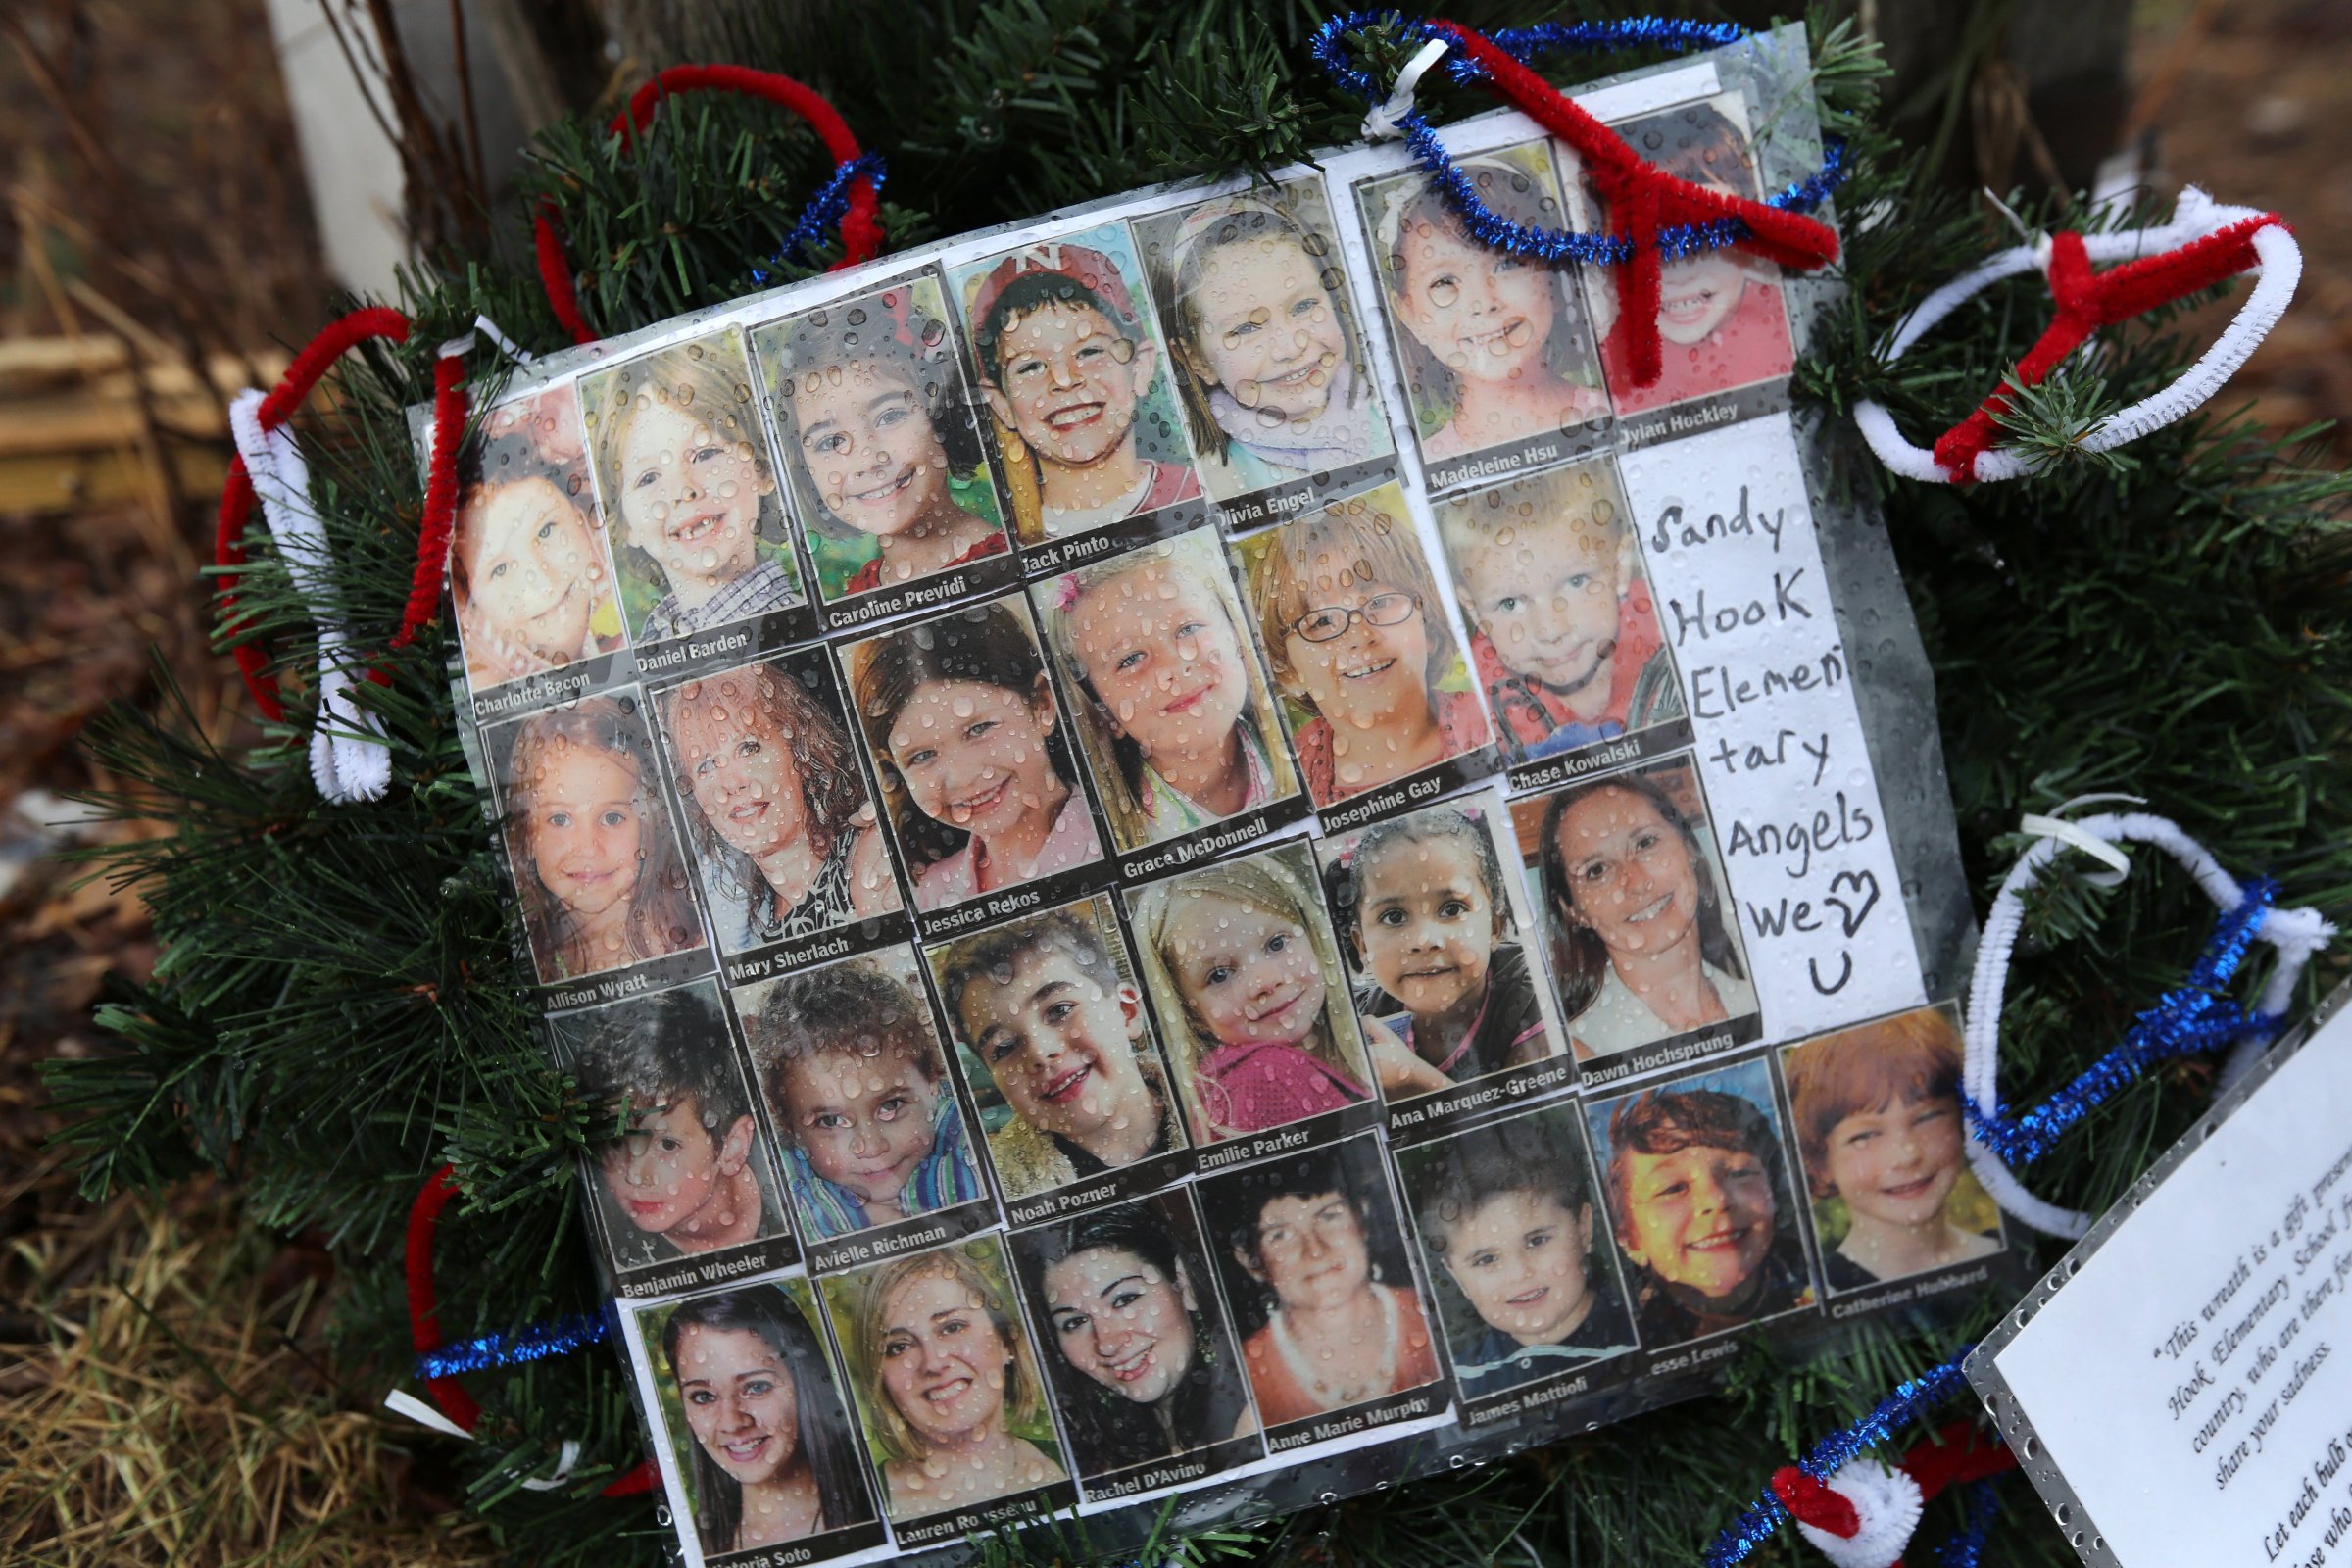 NEWTOWN, CT - JANUARY 14:  Photos of Sandy Hook Elementary School massacre victims sits at a small memorial near the school on January 14, 2013 in Newtown, Connecticut. The town marked a month anniversay since the massacre of 26 children and adults at the school, the second-worst such shooting in U.S. history.  (Photo by John Moore/Getty Images)